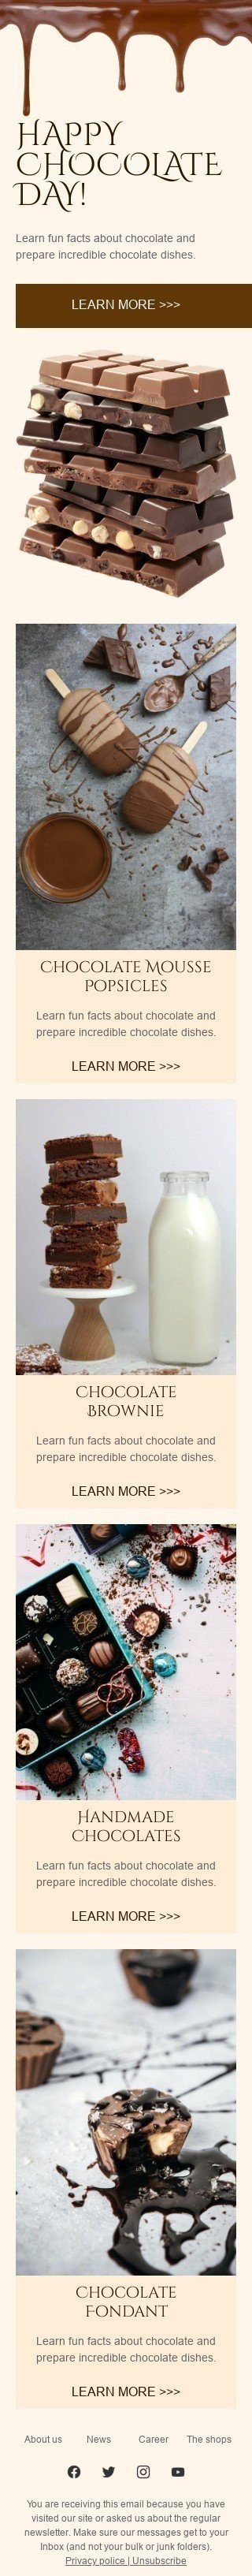 International Chocolate Day Email Template «Incredible chocolate dishes» for Publications & Blogging industry mobile view